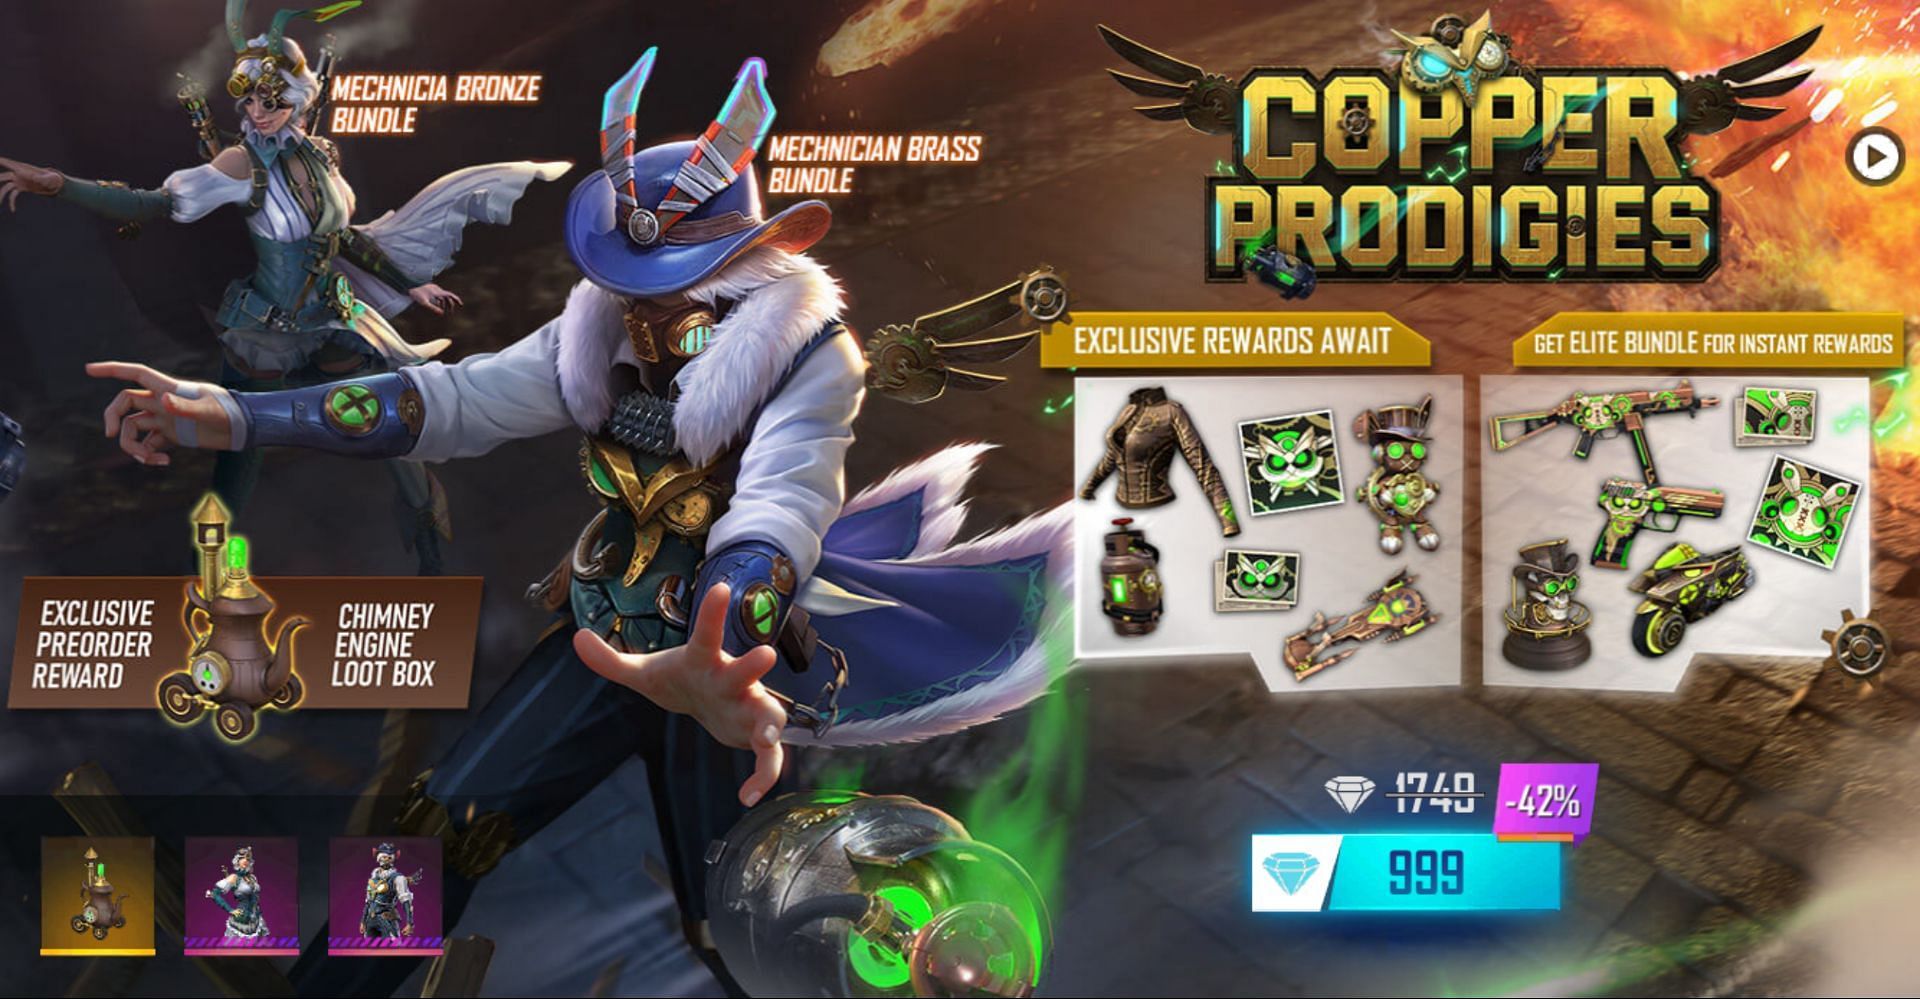 Copper Prodigies is also available for pre-order (Image via Garena)